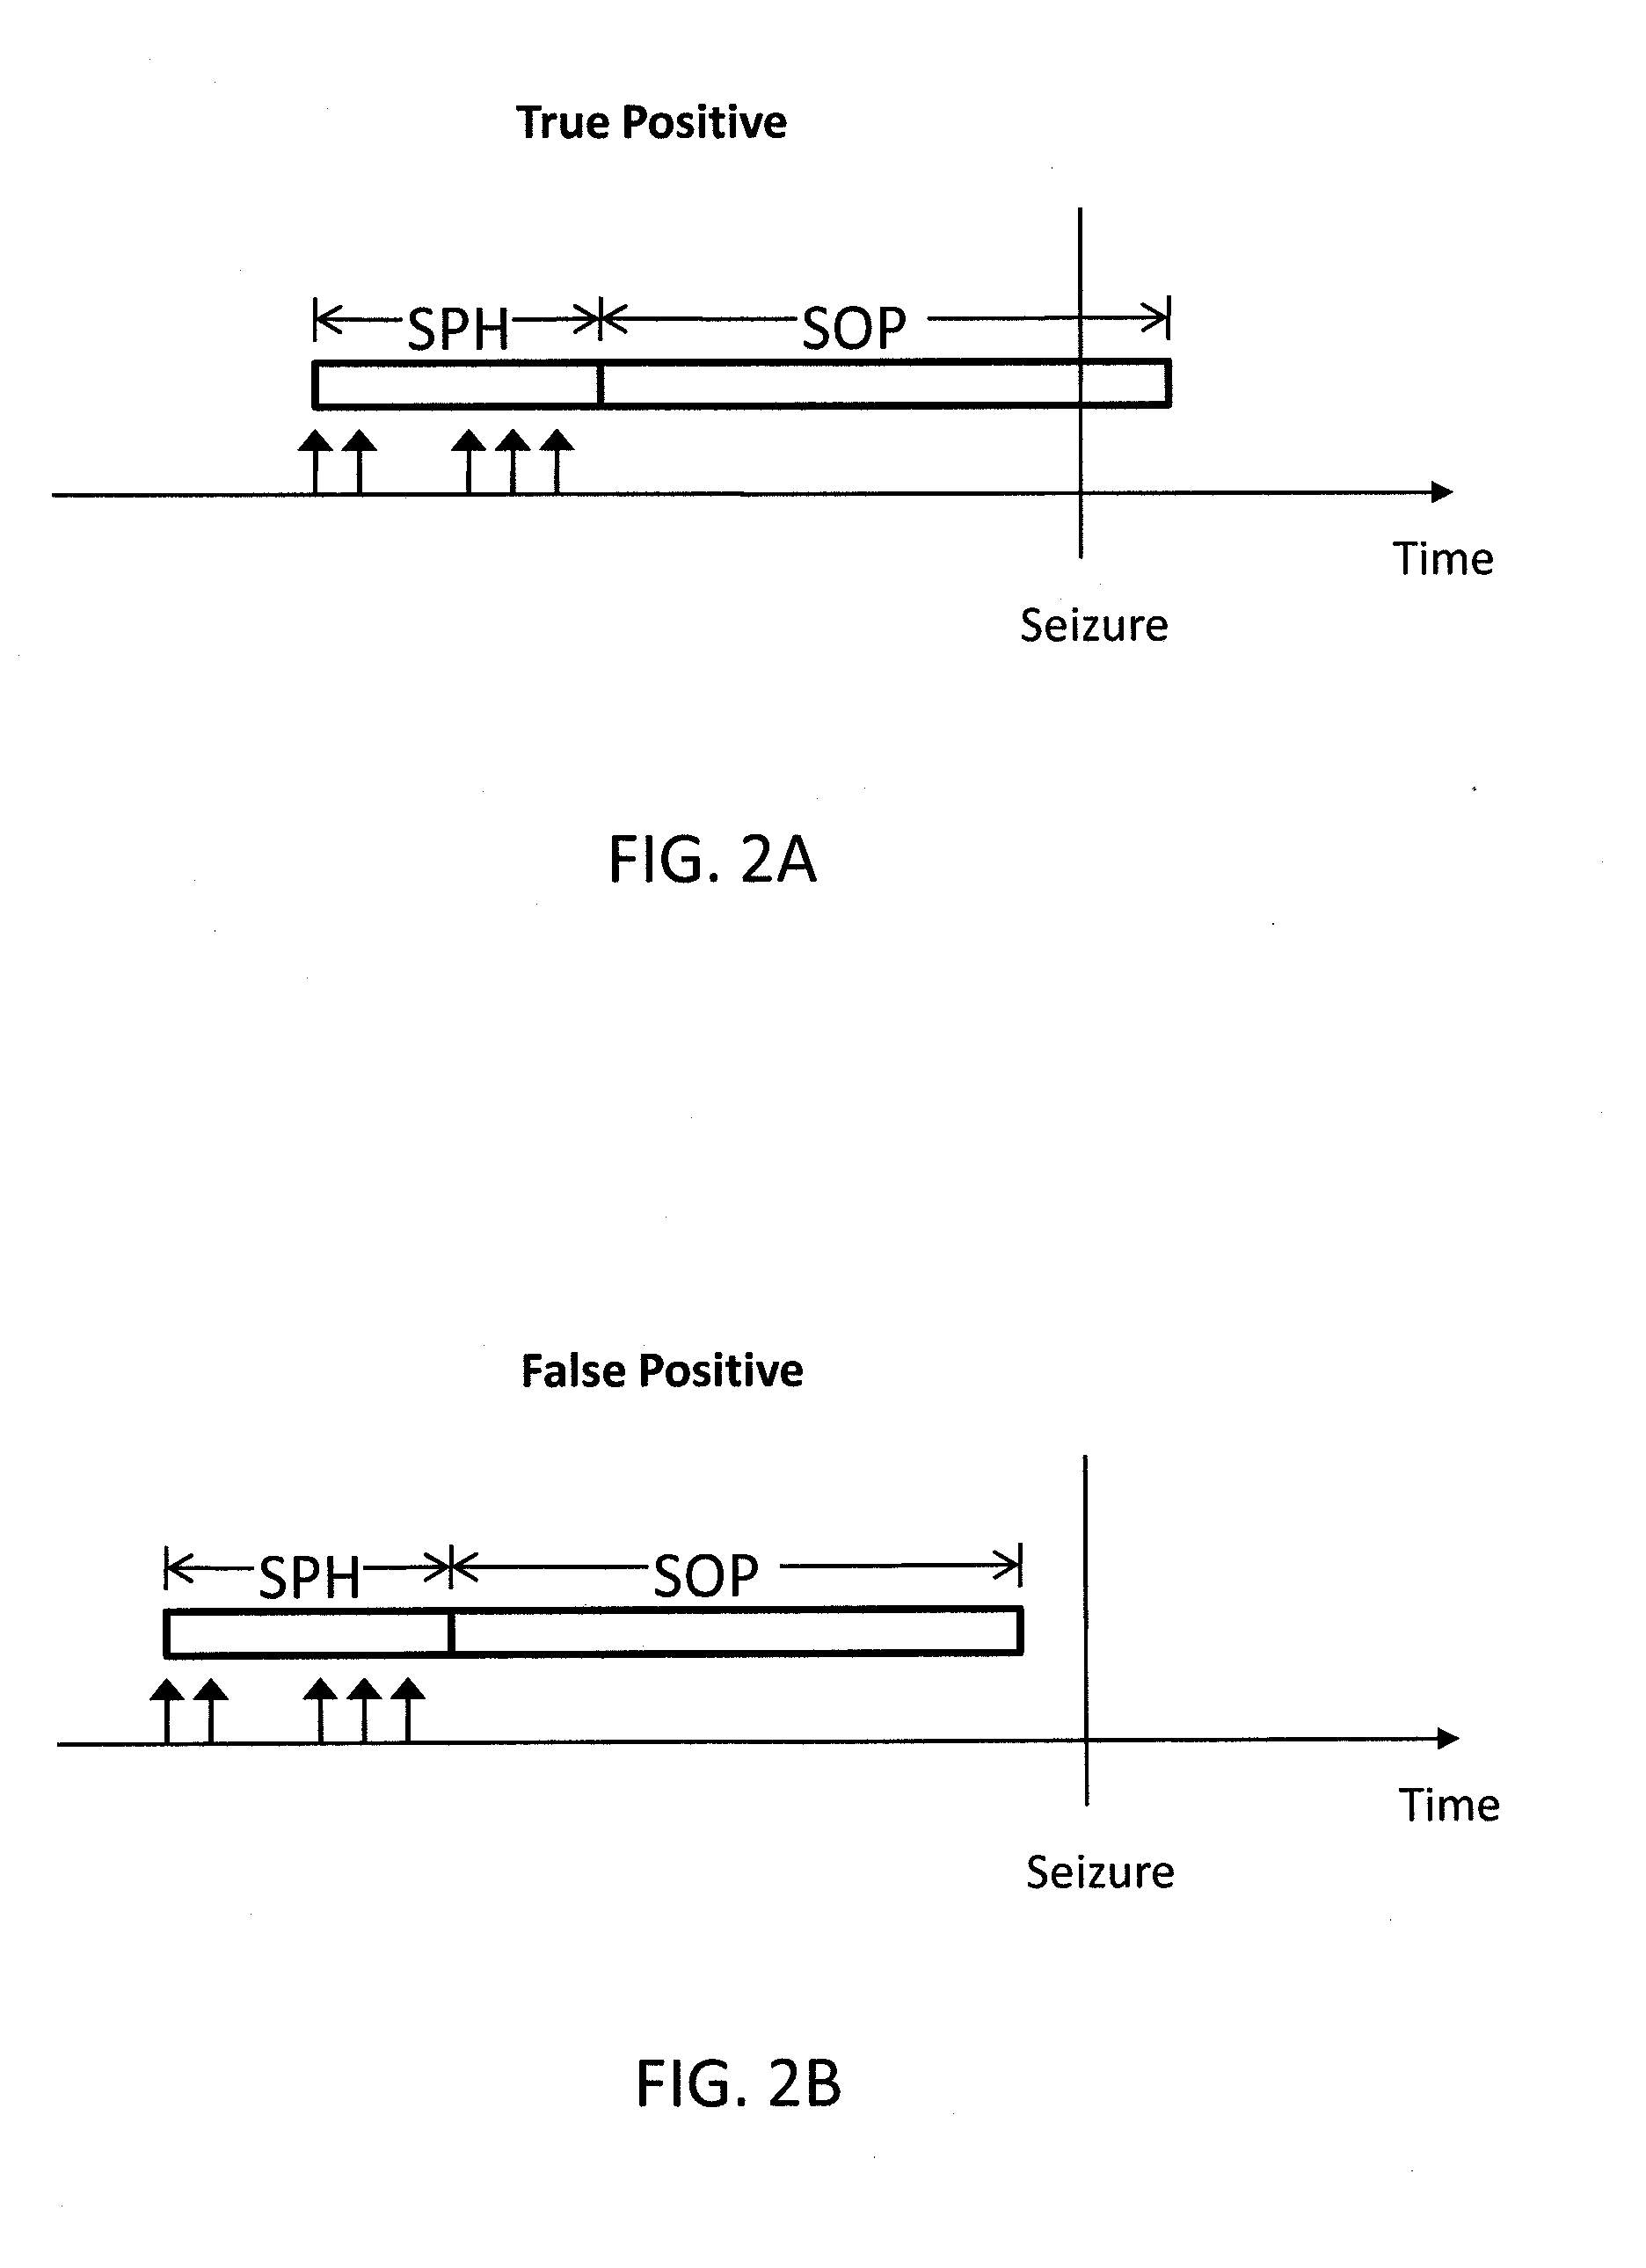 Methods and Systems for Characterizing and Generating a Patient-Specific Seizure Advisory System